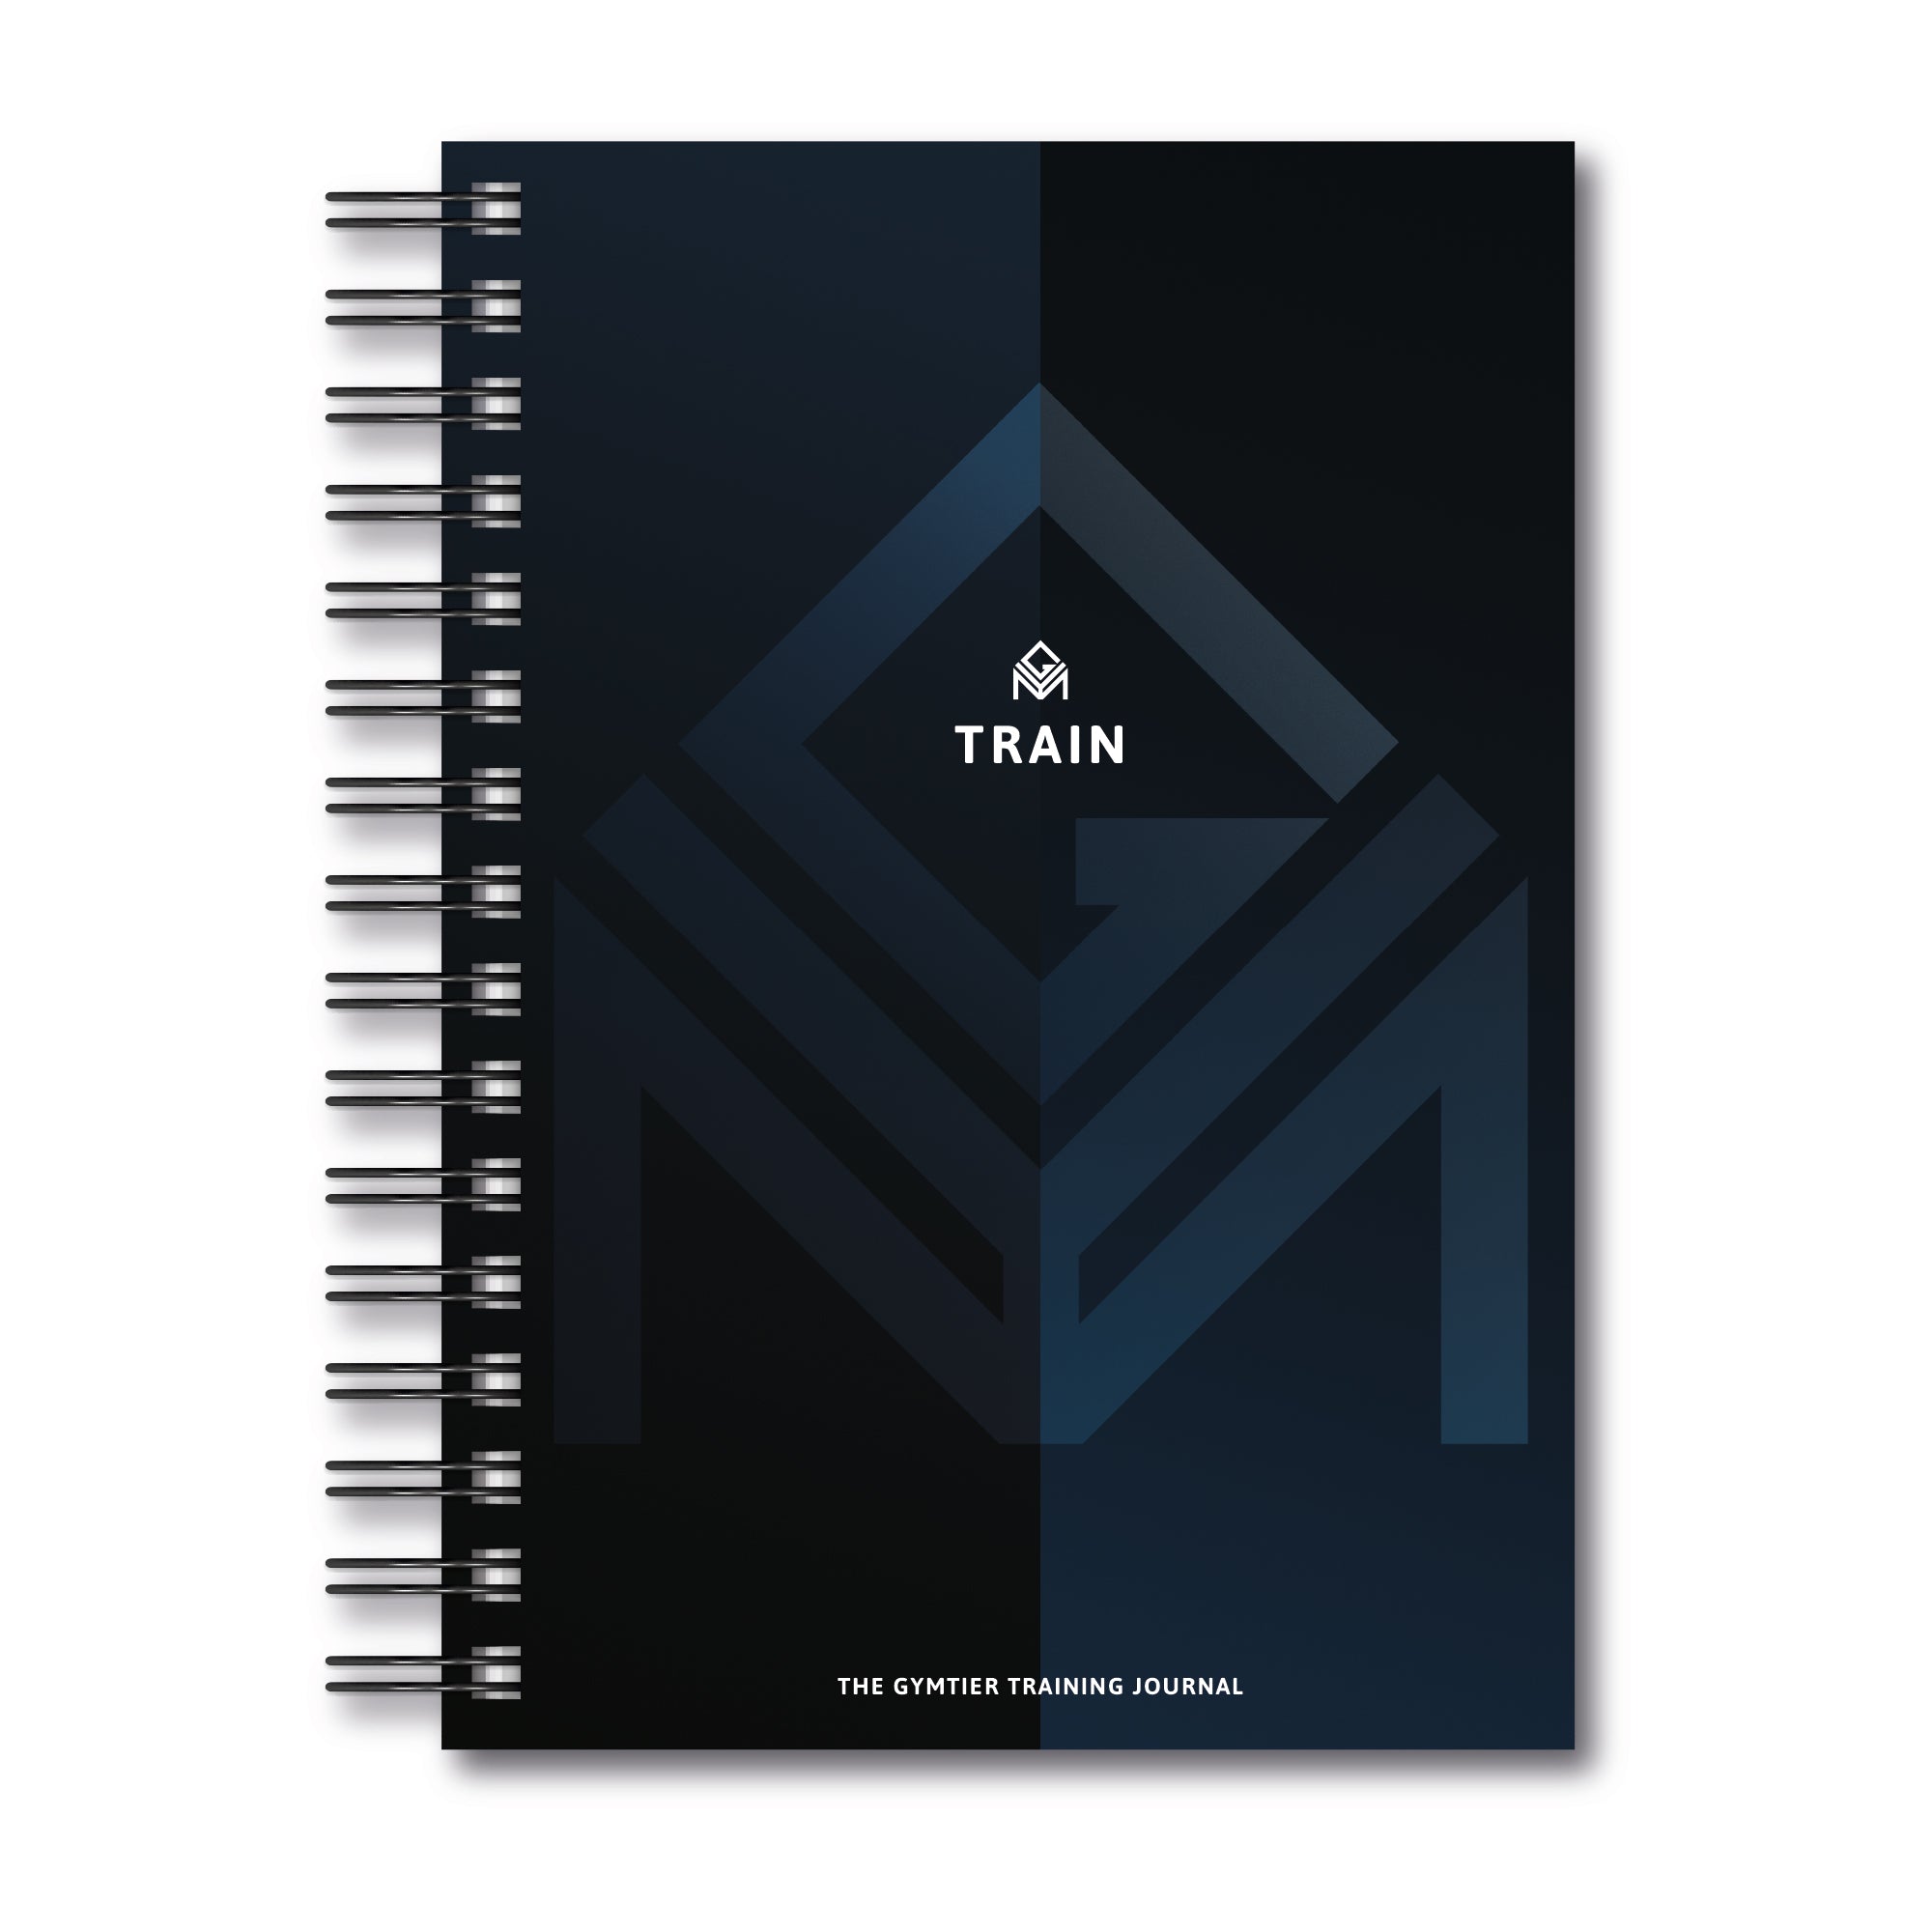 The GYMTIER Training Journal